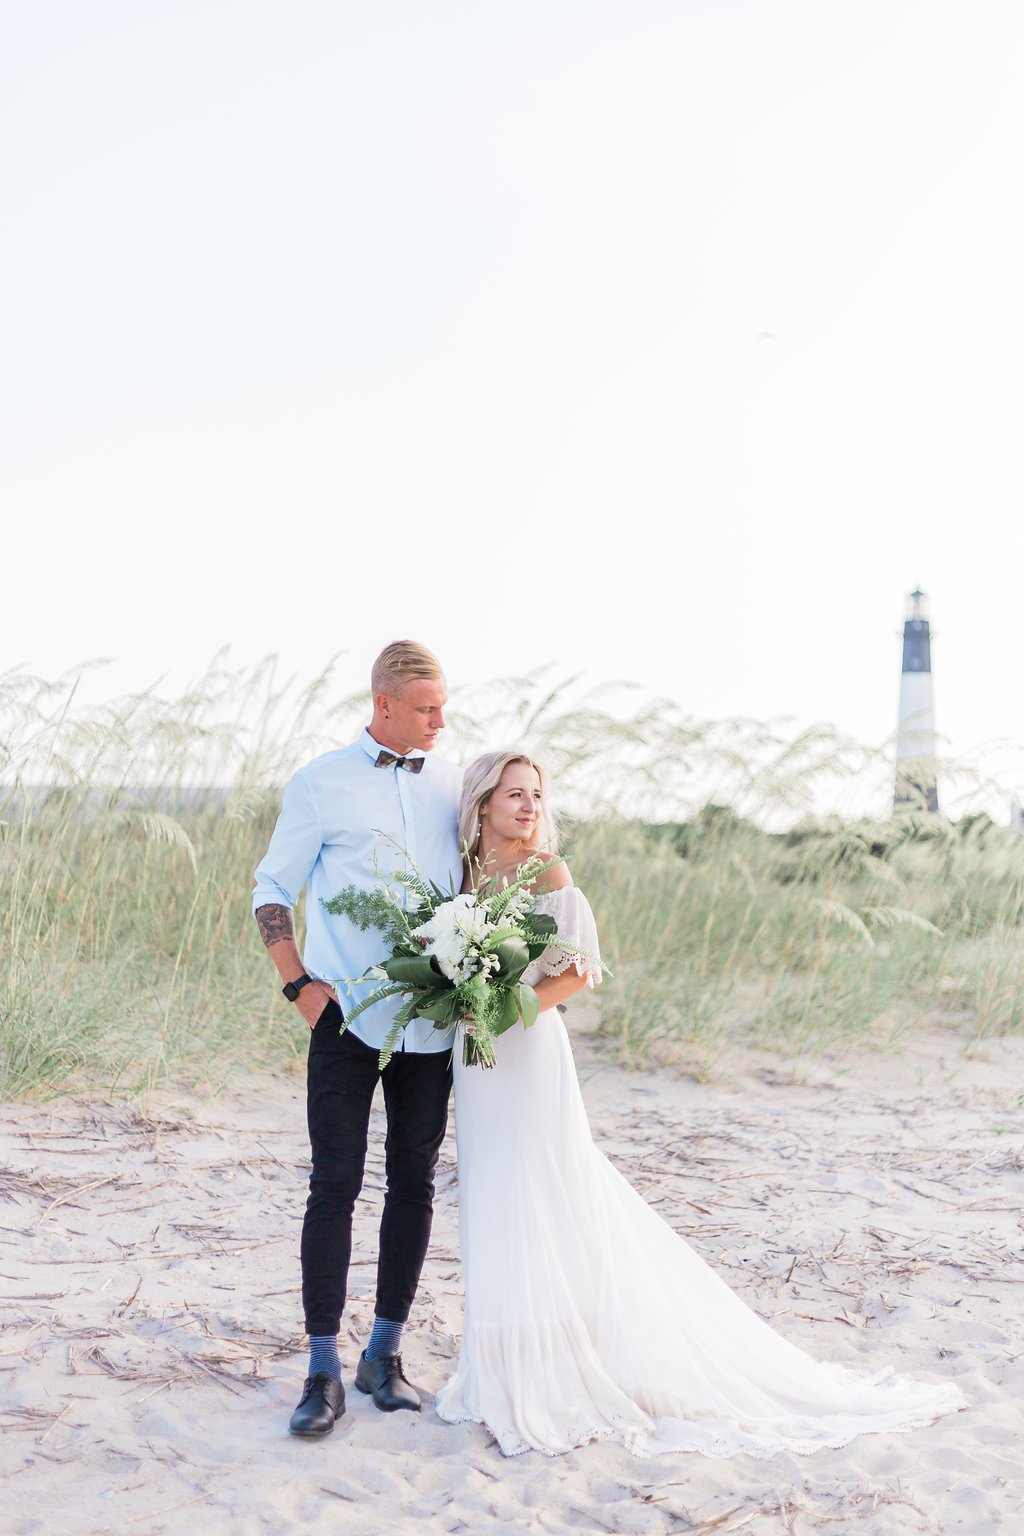 savannah-bridal-shop-last-minute-wedding-planning-details-you-should-start-on-NOW-bluebell-photography-daughters-of-simone-tybee-island-wedding-1.jpg